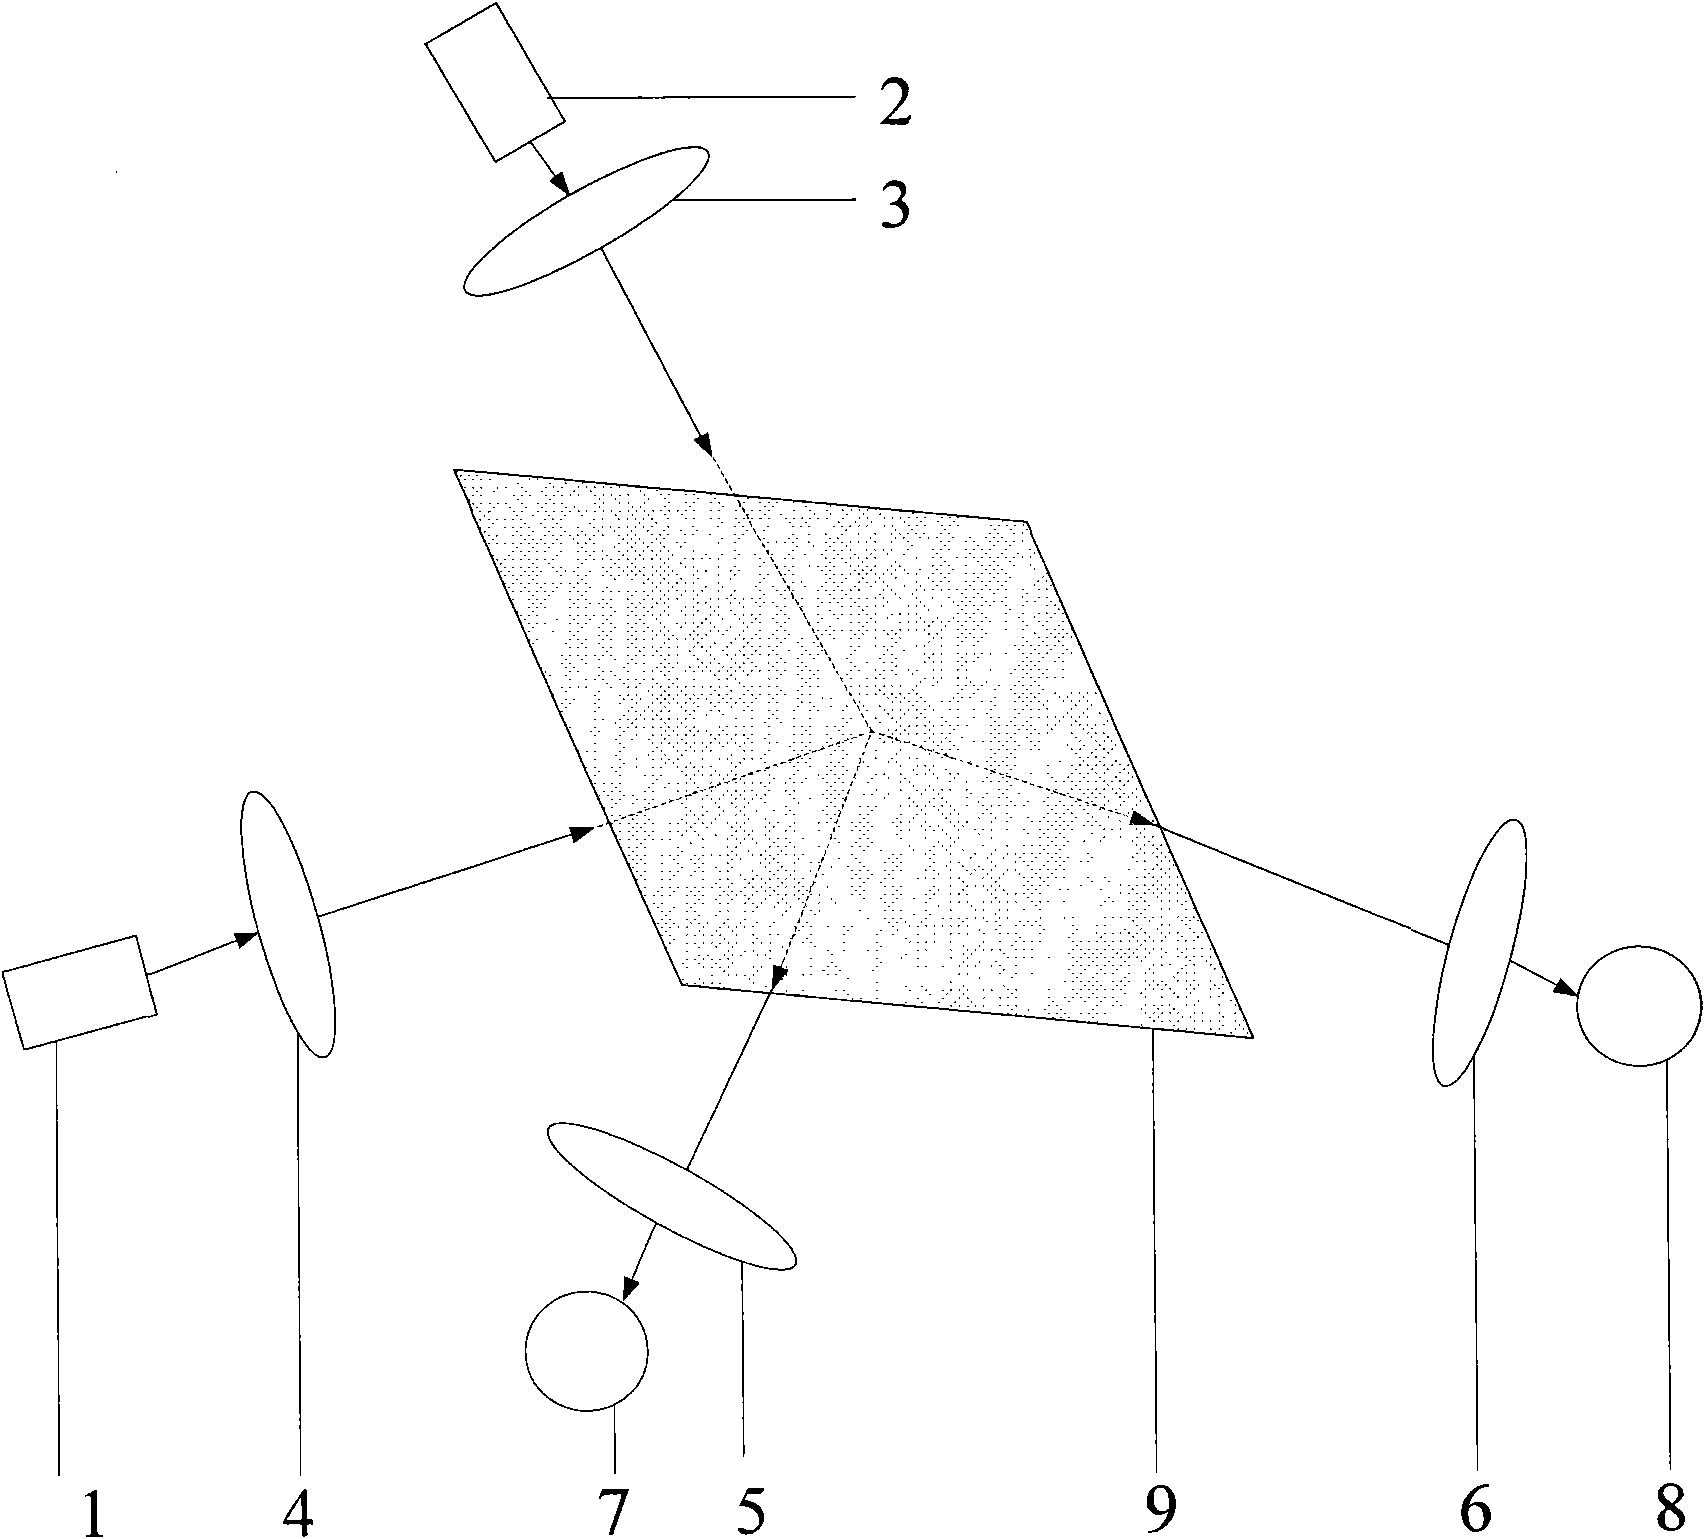 Preparation method of anti-counterfeit paint with property of multiple optics frequency conversion and anti-counterfeit detection method